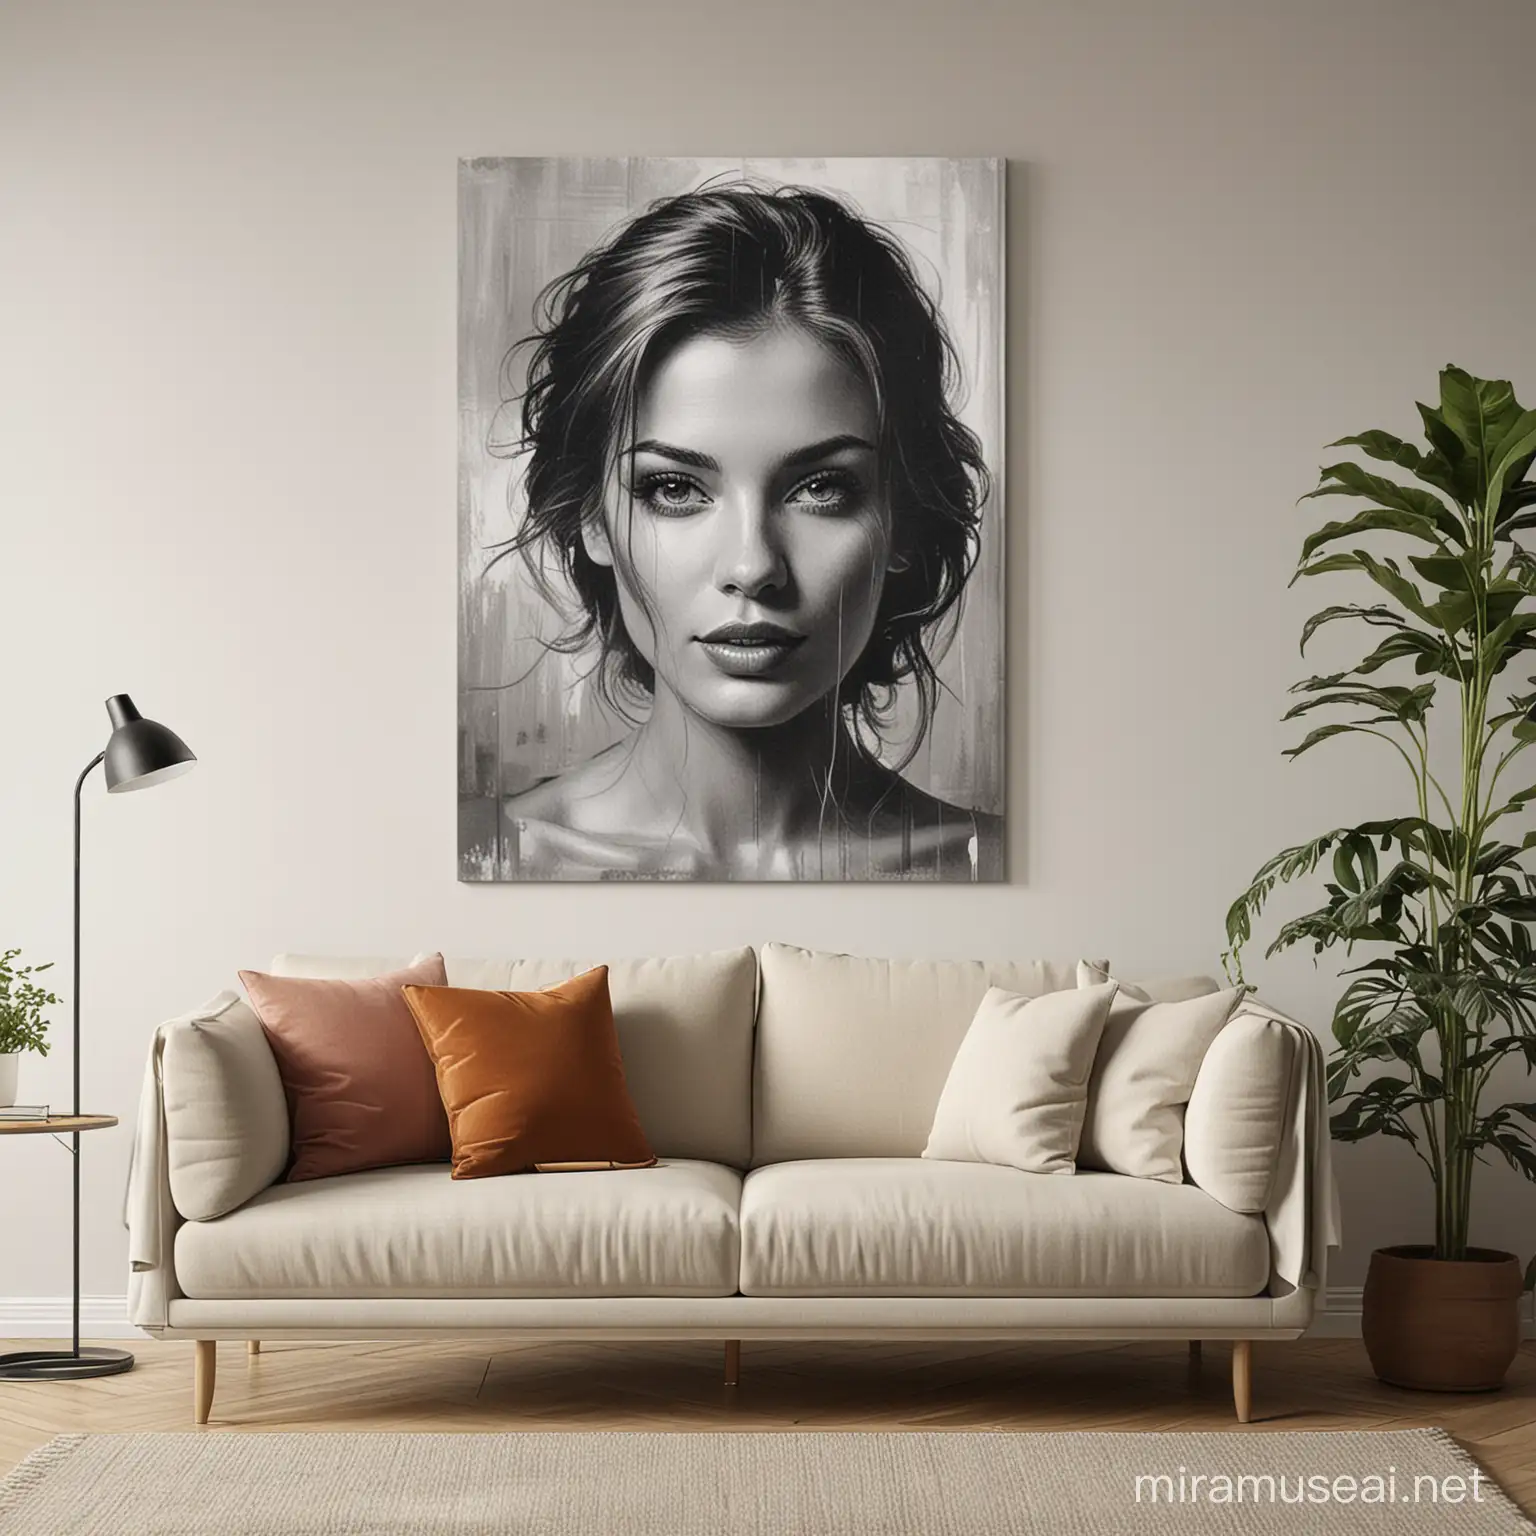 Modern Abstract Wall Art in a Stylish Living Room